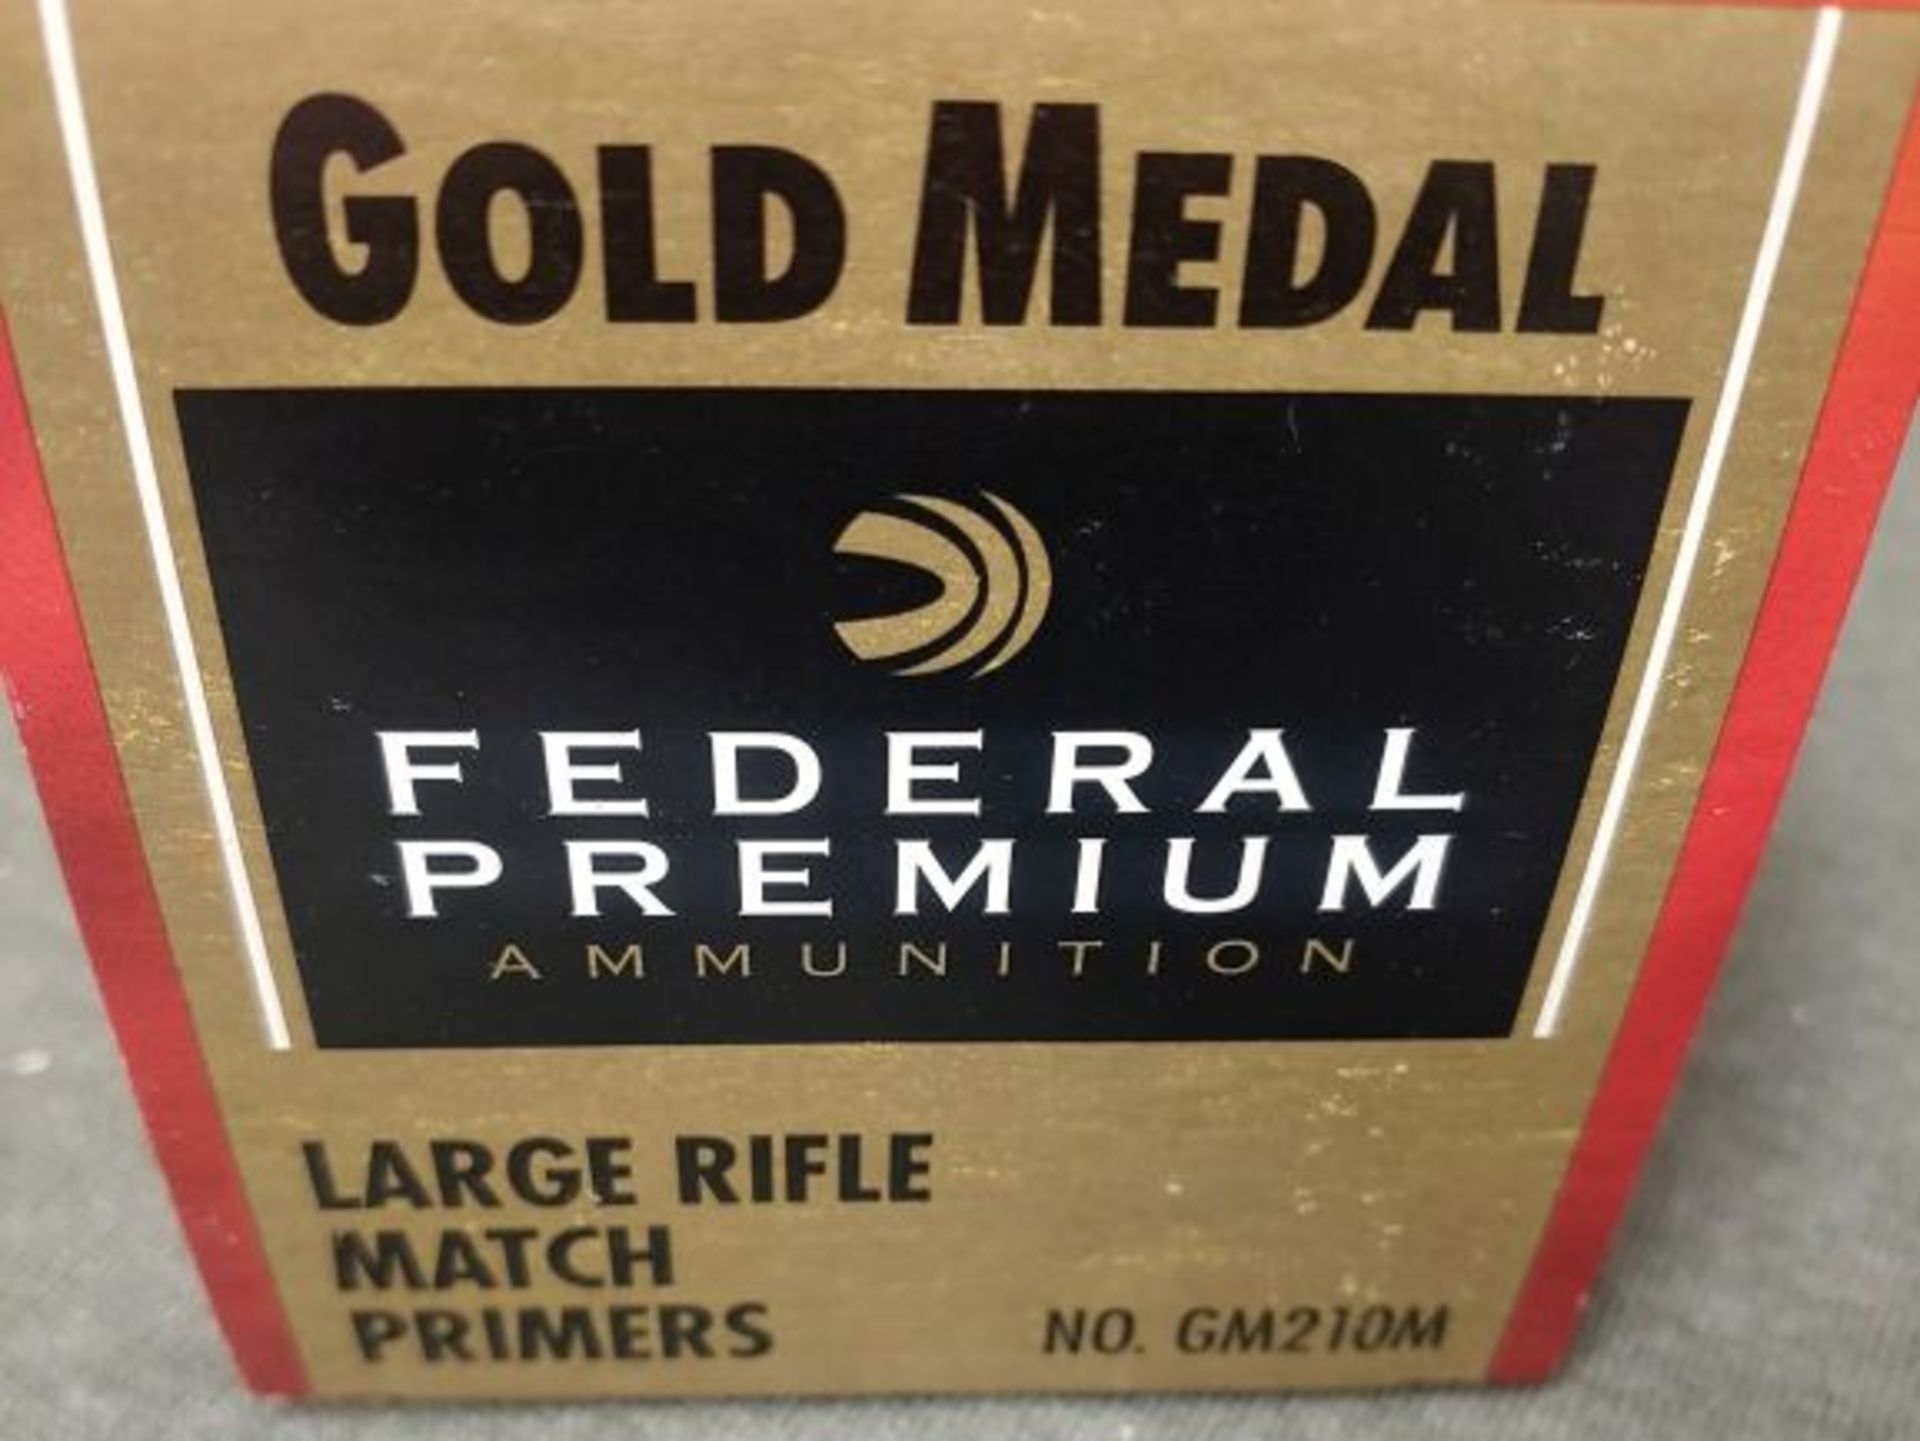 635. Fed Premium Large Rifle Match Primers, Box of 1000 (1x the Money) - Image 2 of 3